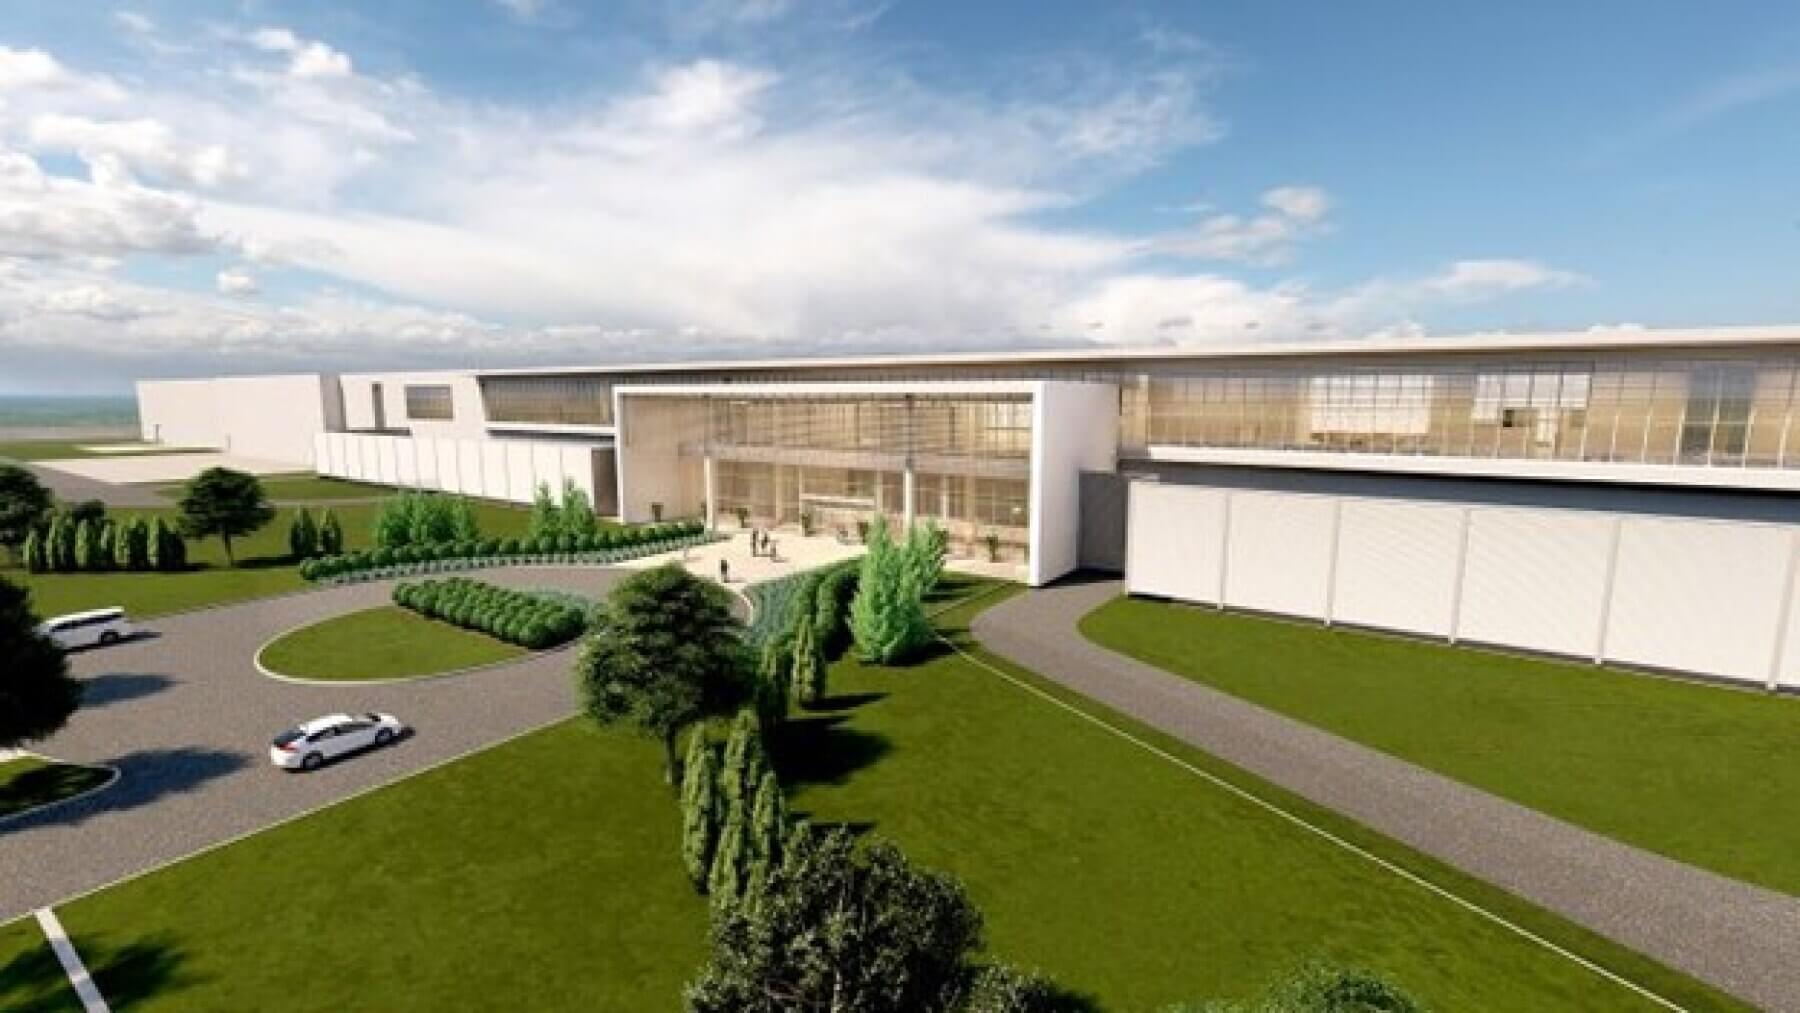 a rendering of the Honda/LGES battery plant rendering